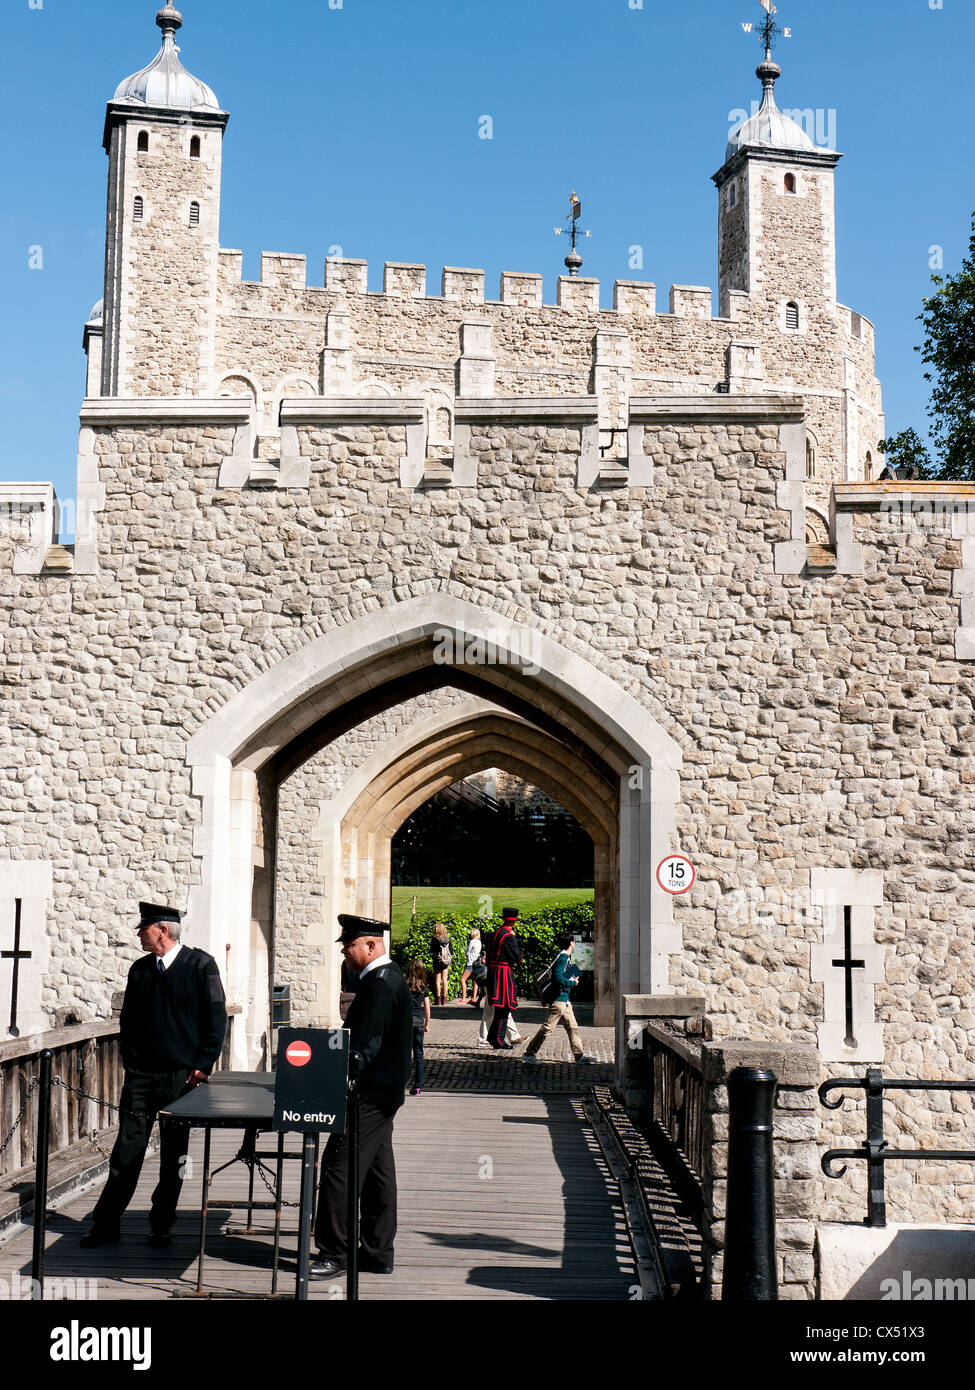 Entrance at the South tower and ramparts of the Tower of London, England Stock Photo